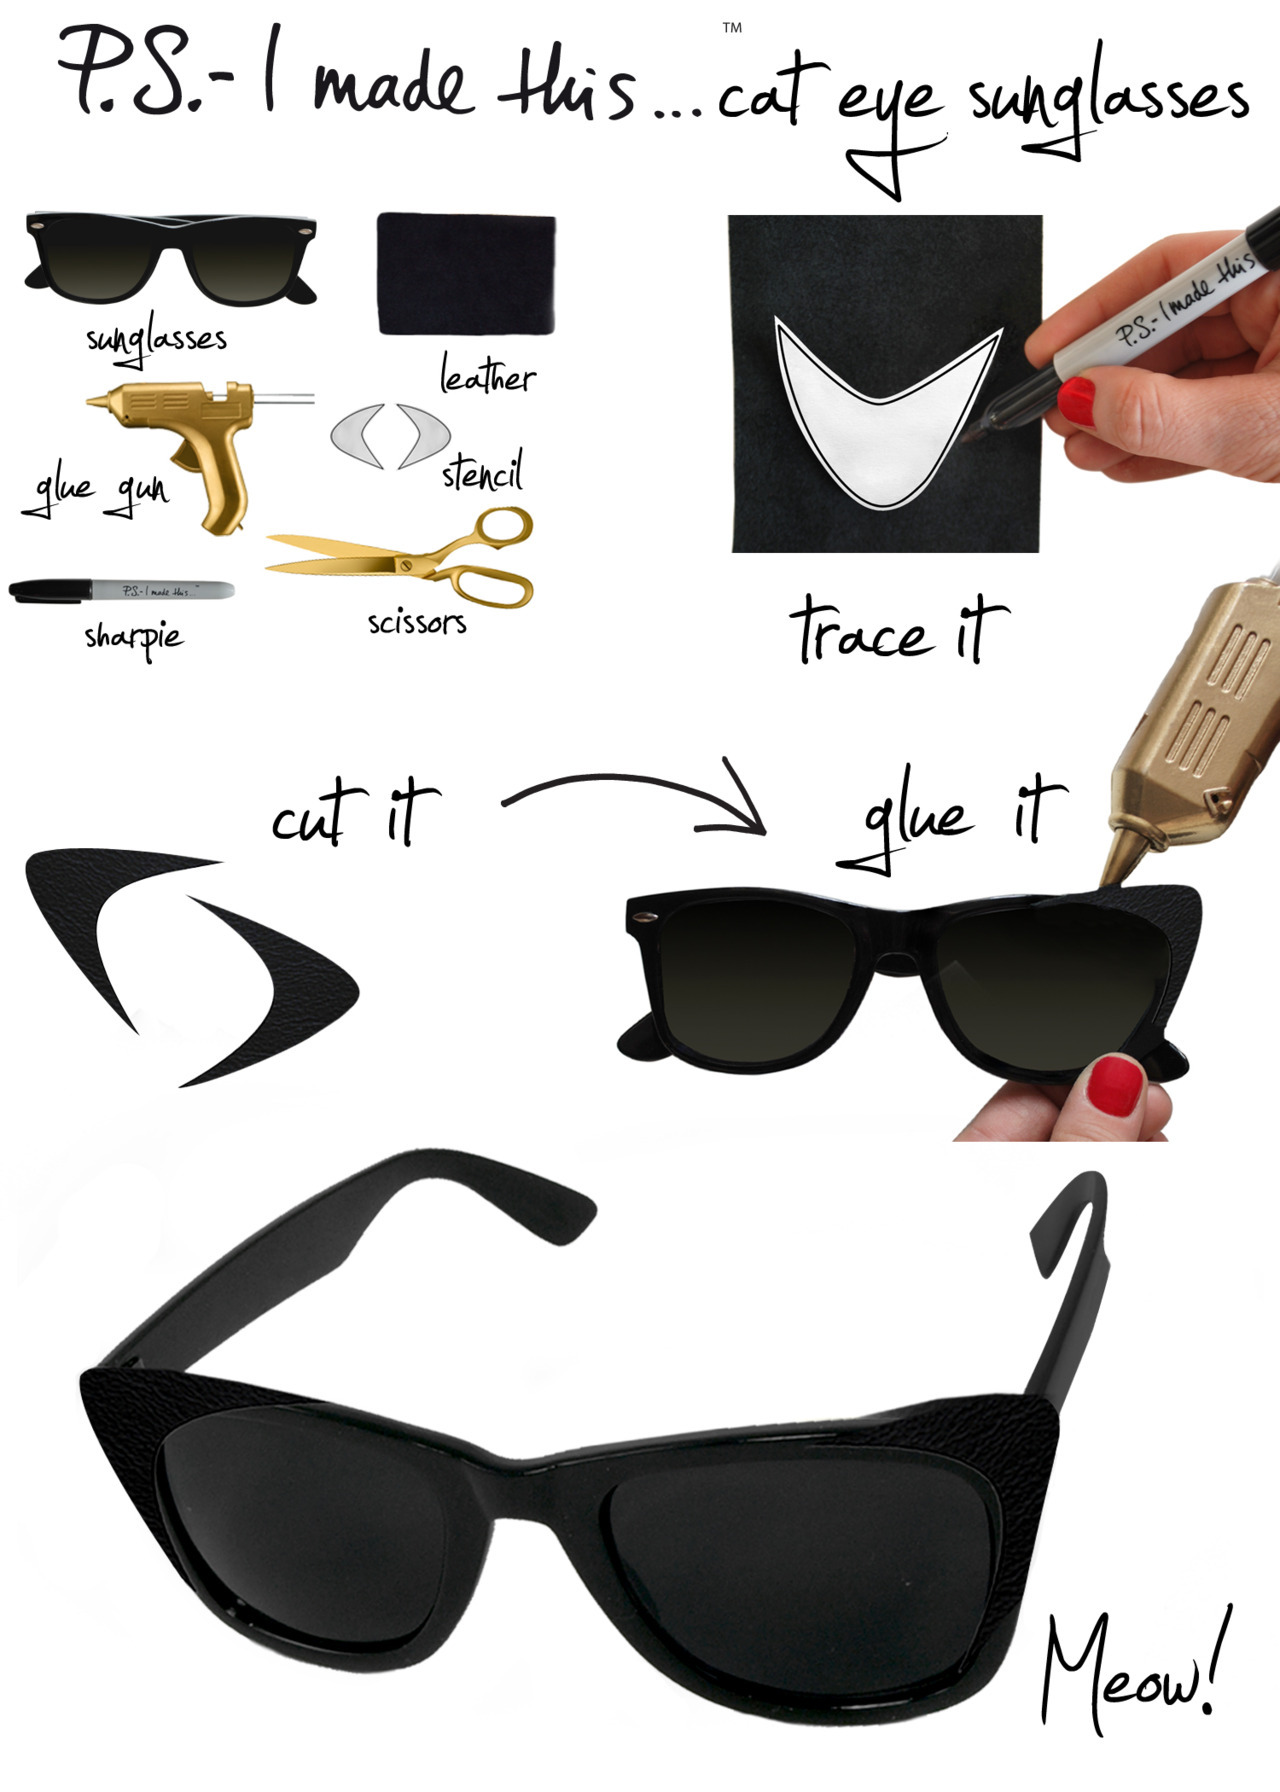 Step into the spotlight in the coolest of shades with a nod to retro Hollywood glamour. Tom Ford masters sexy chic with frames that bring stylish drama to any look, day or night. Make a statement and prove your future&#8217;s so bright with this purrrfect DIY. 
To create, re purpose an old pair of sunnies by adding a shapely accent. Decide on the shape and style for your pattern and trace onto paper. Create two of these and &#8220;test&#8221; on your sunglasses to make sure you&#8217;re happy with the shape and size. Trace the pattern onto a think black piece of fabric or leather.  Use glue to secure onto each frame.